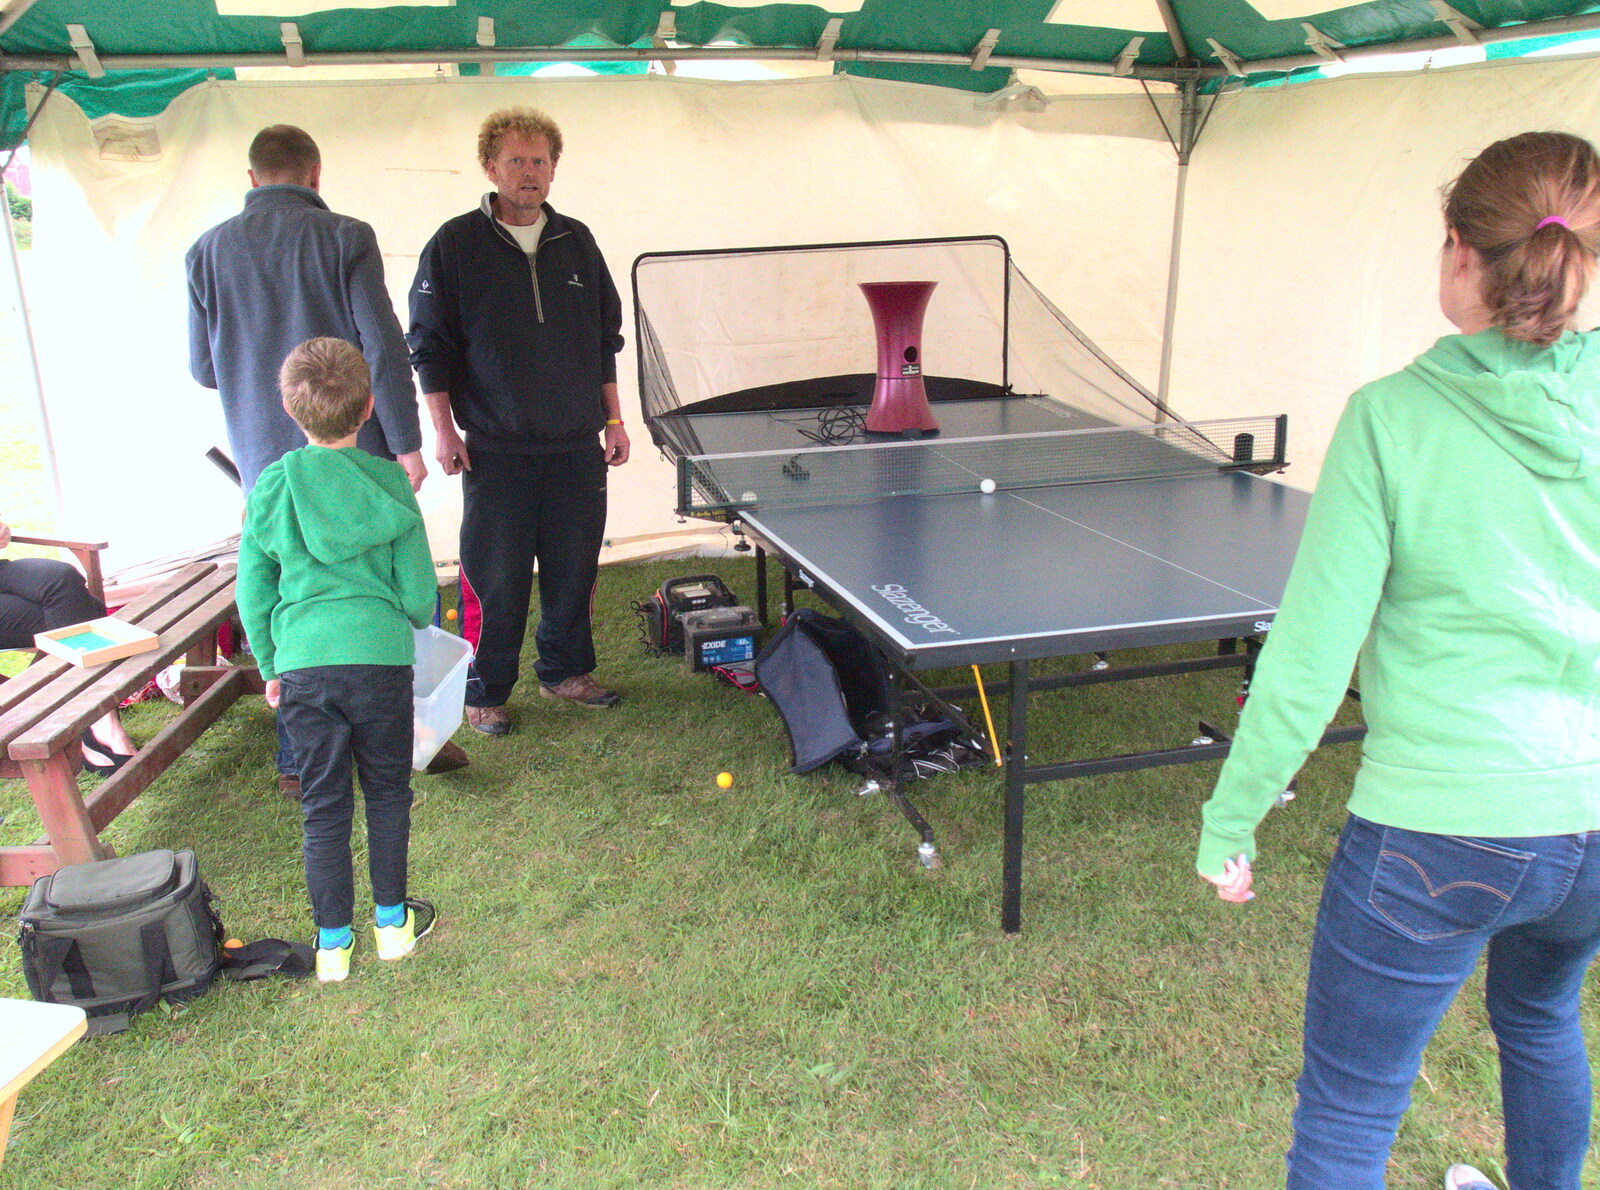 Wavy looks after the table-tennis tent from A Summer Fete, Palgrave, Suffolk - 10th September 2017